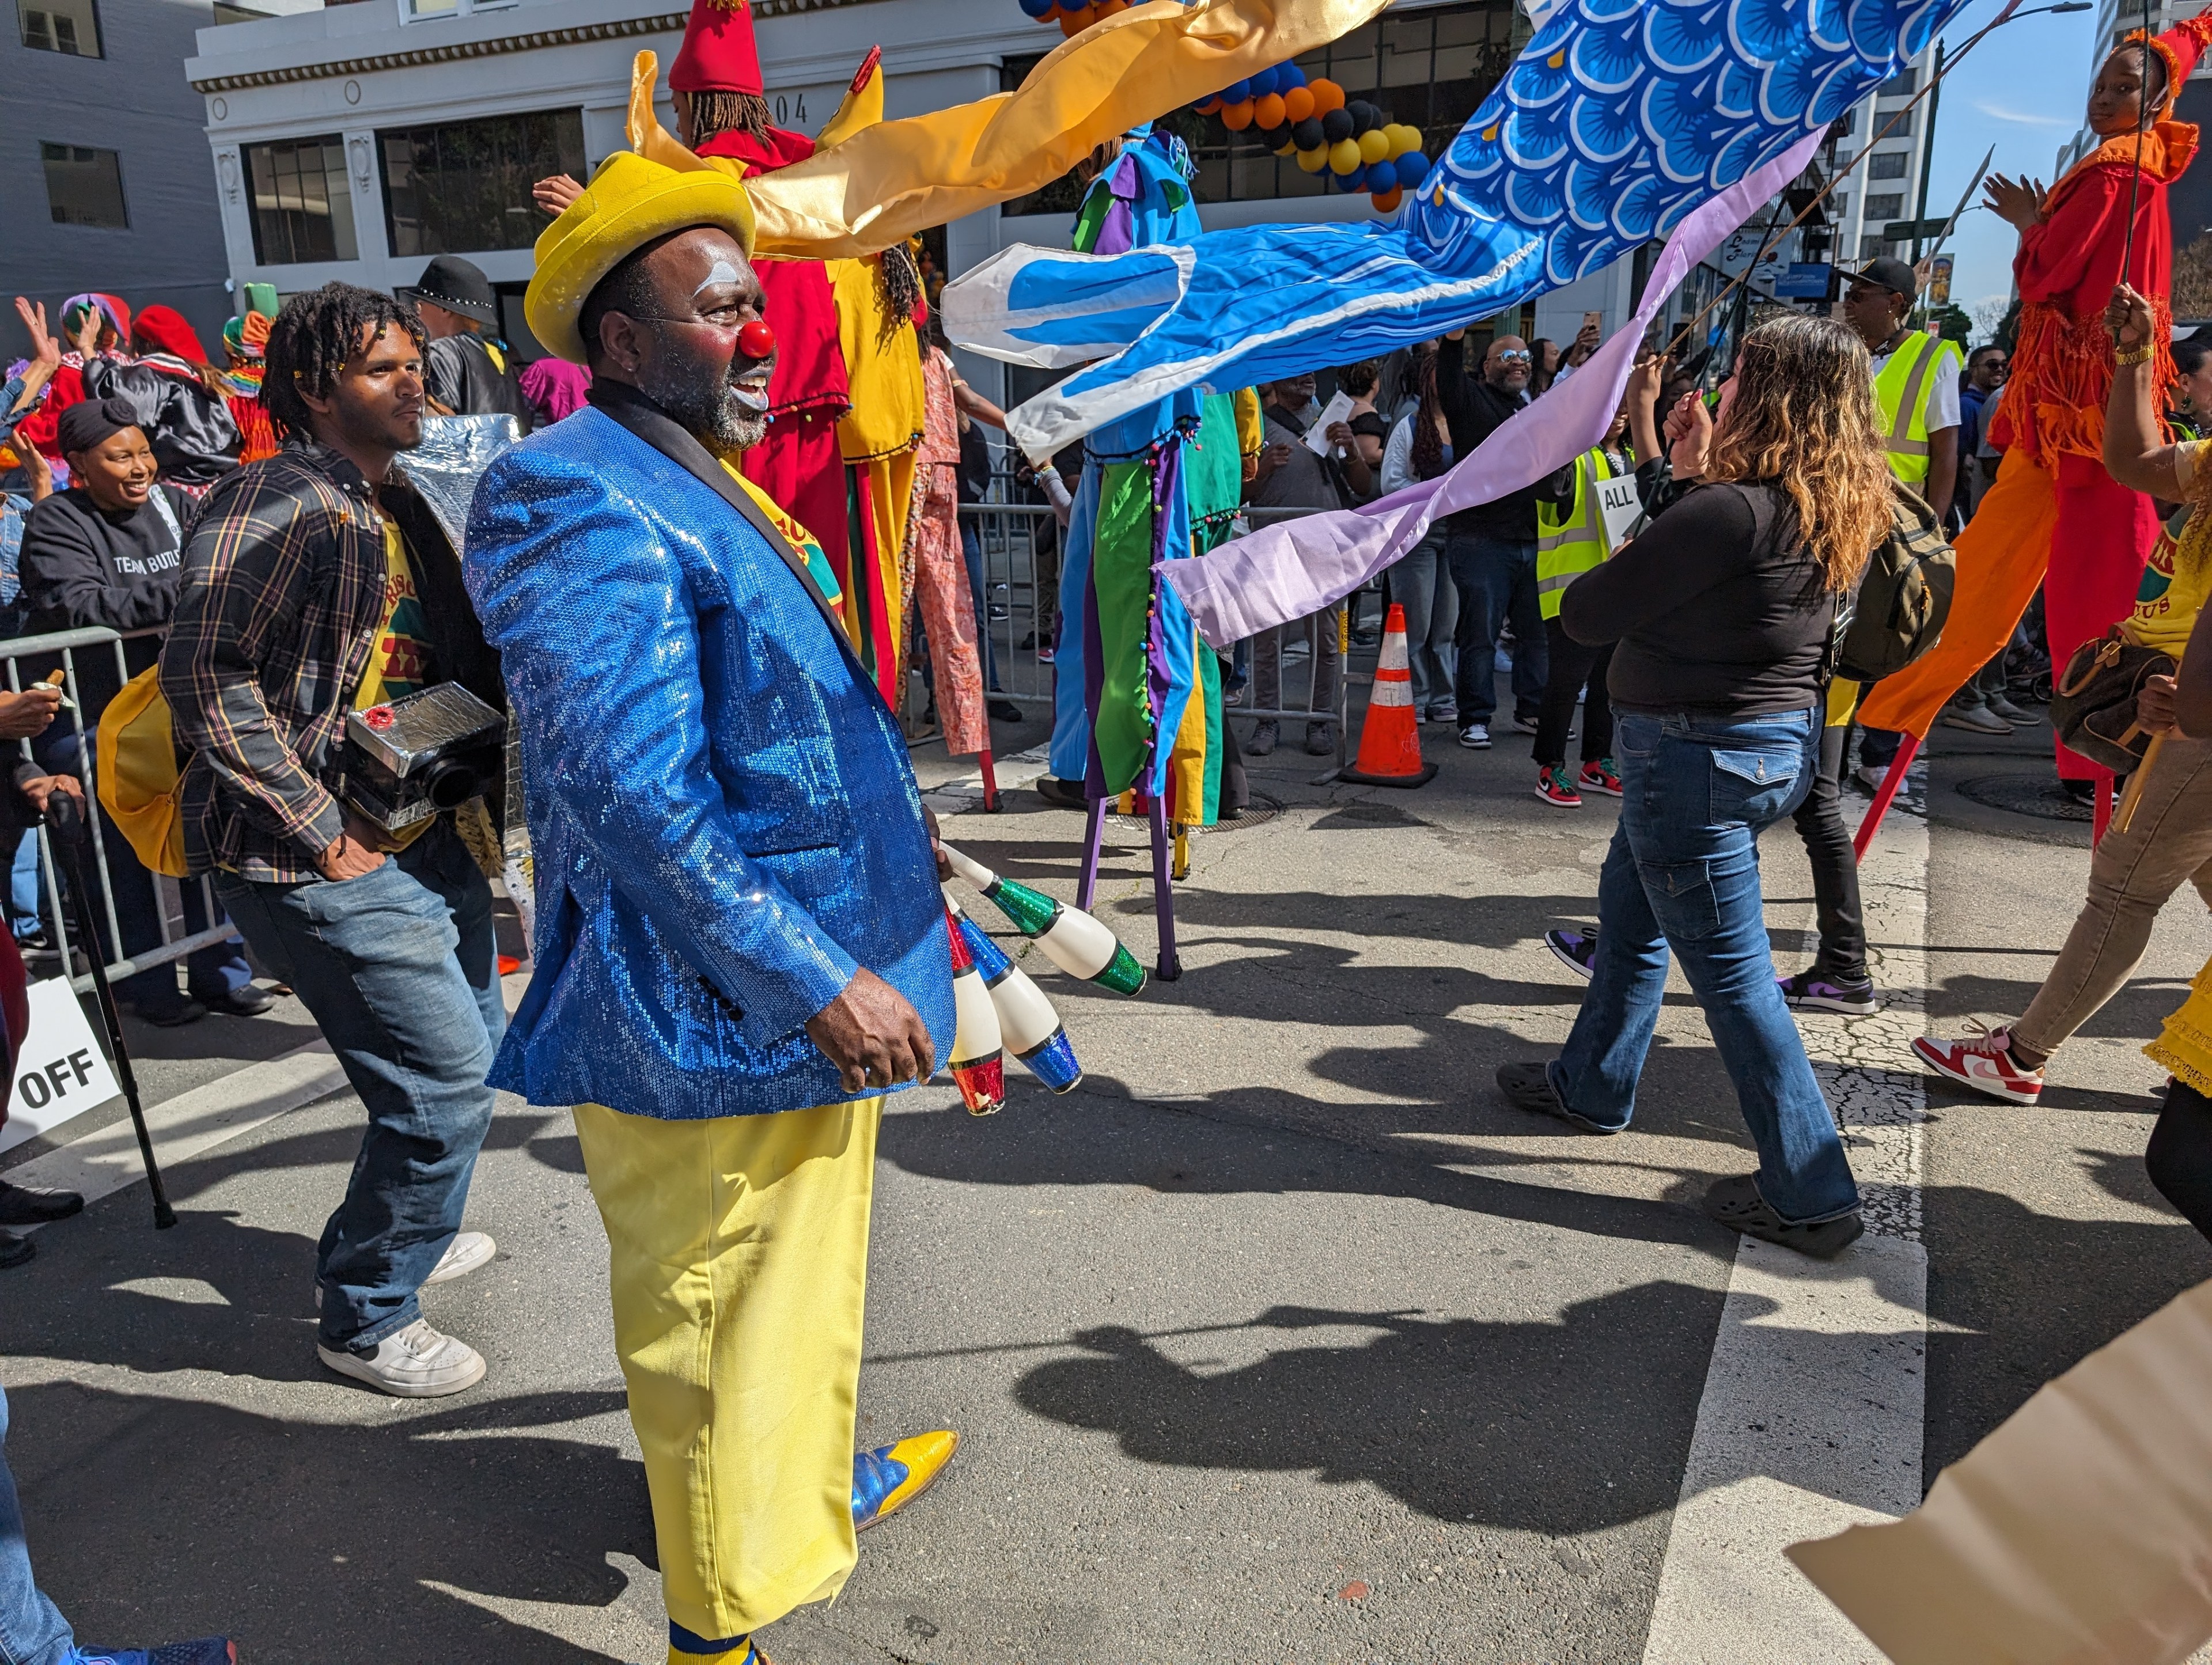 A man in brightly colored clothing and a red clown nose smiles as youngsters on stilts pass him in a parade.